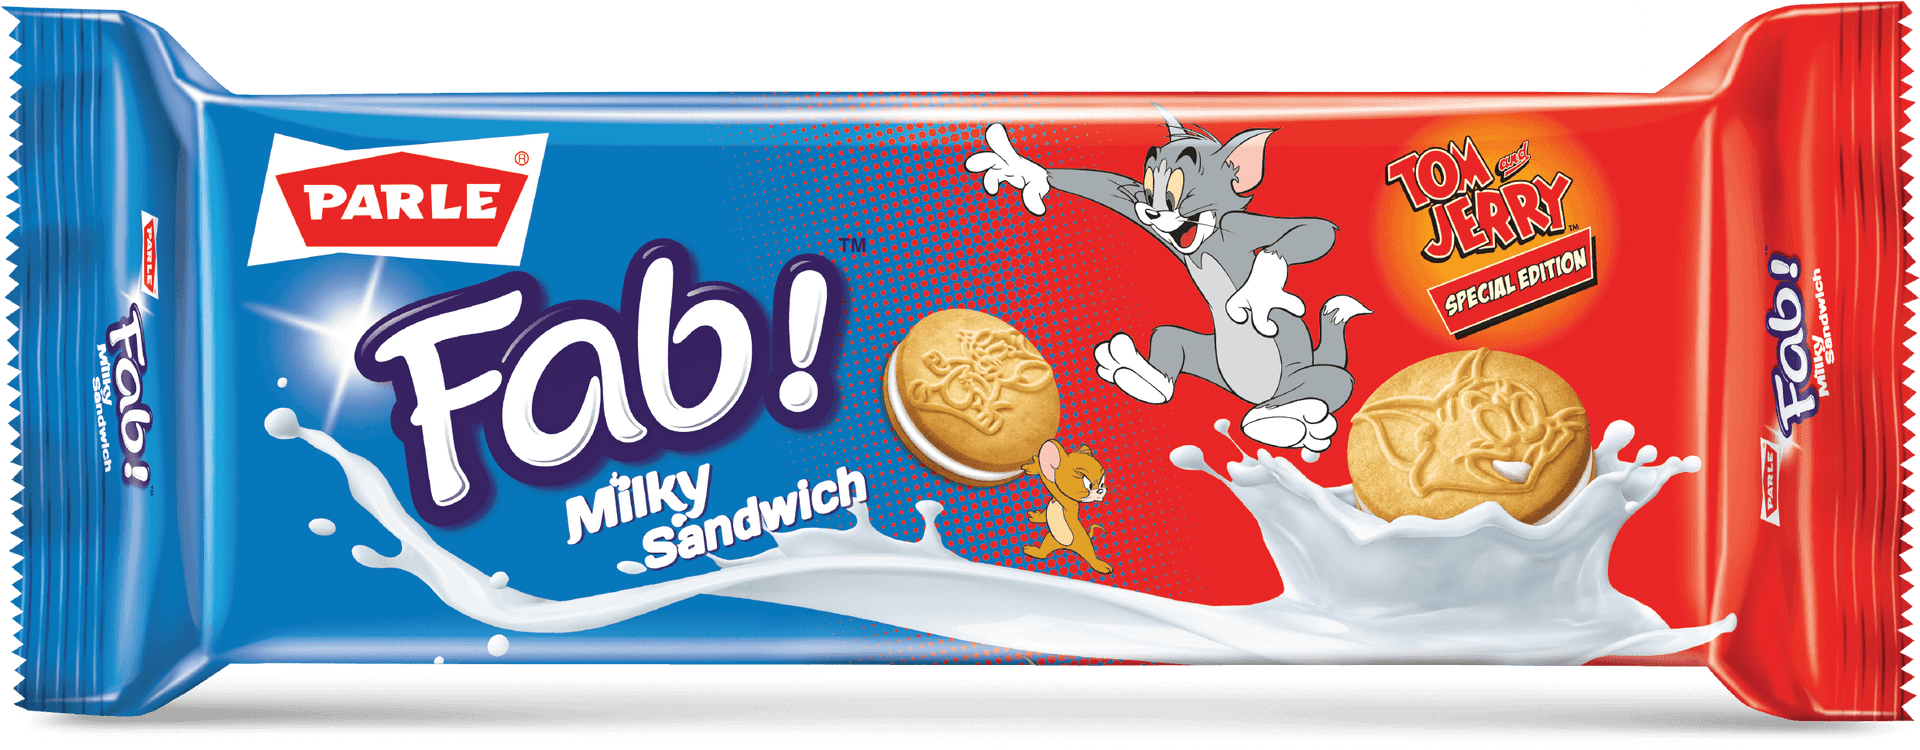 Parle Fab Milky Sandwich Biscuit Pack Tomand Jerry Edition PNG